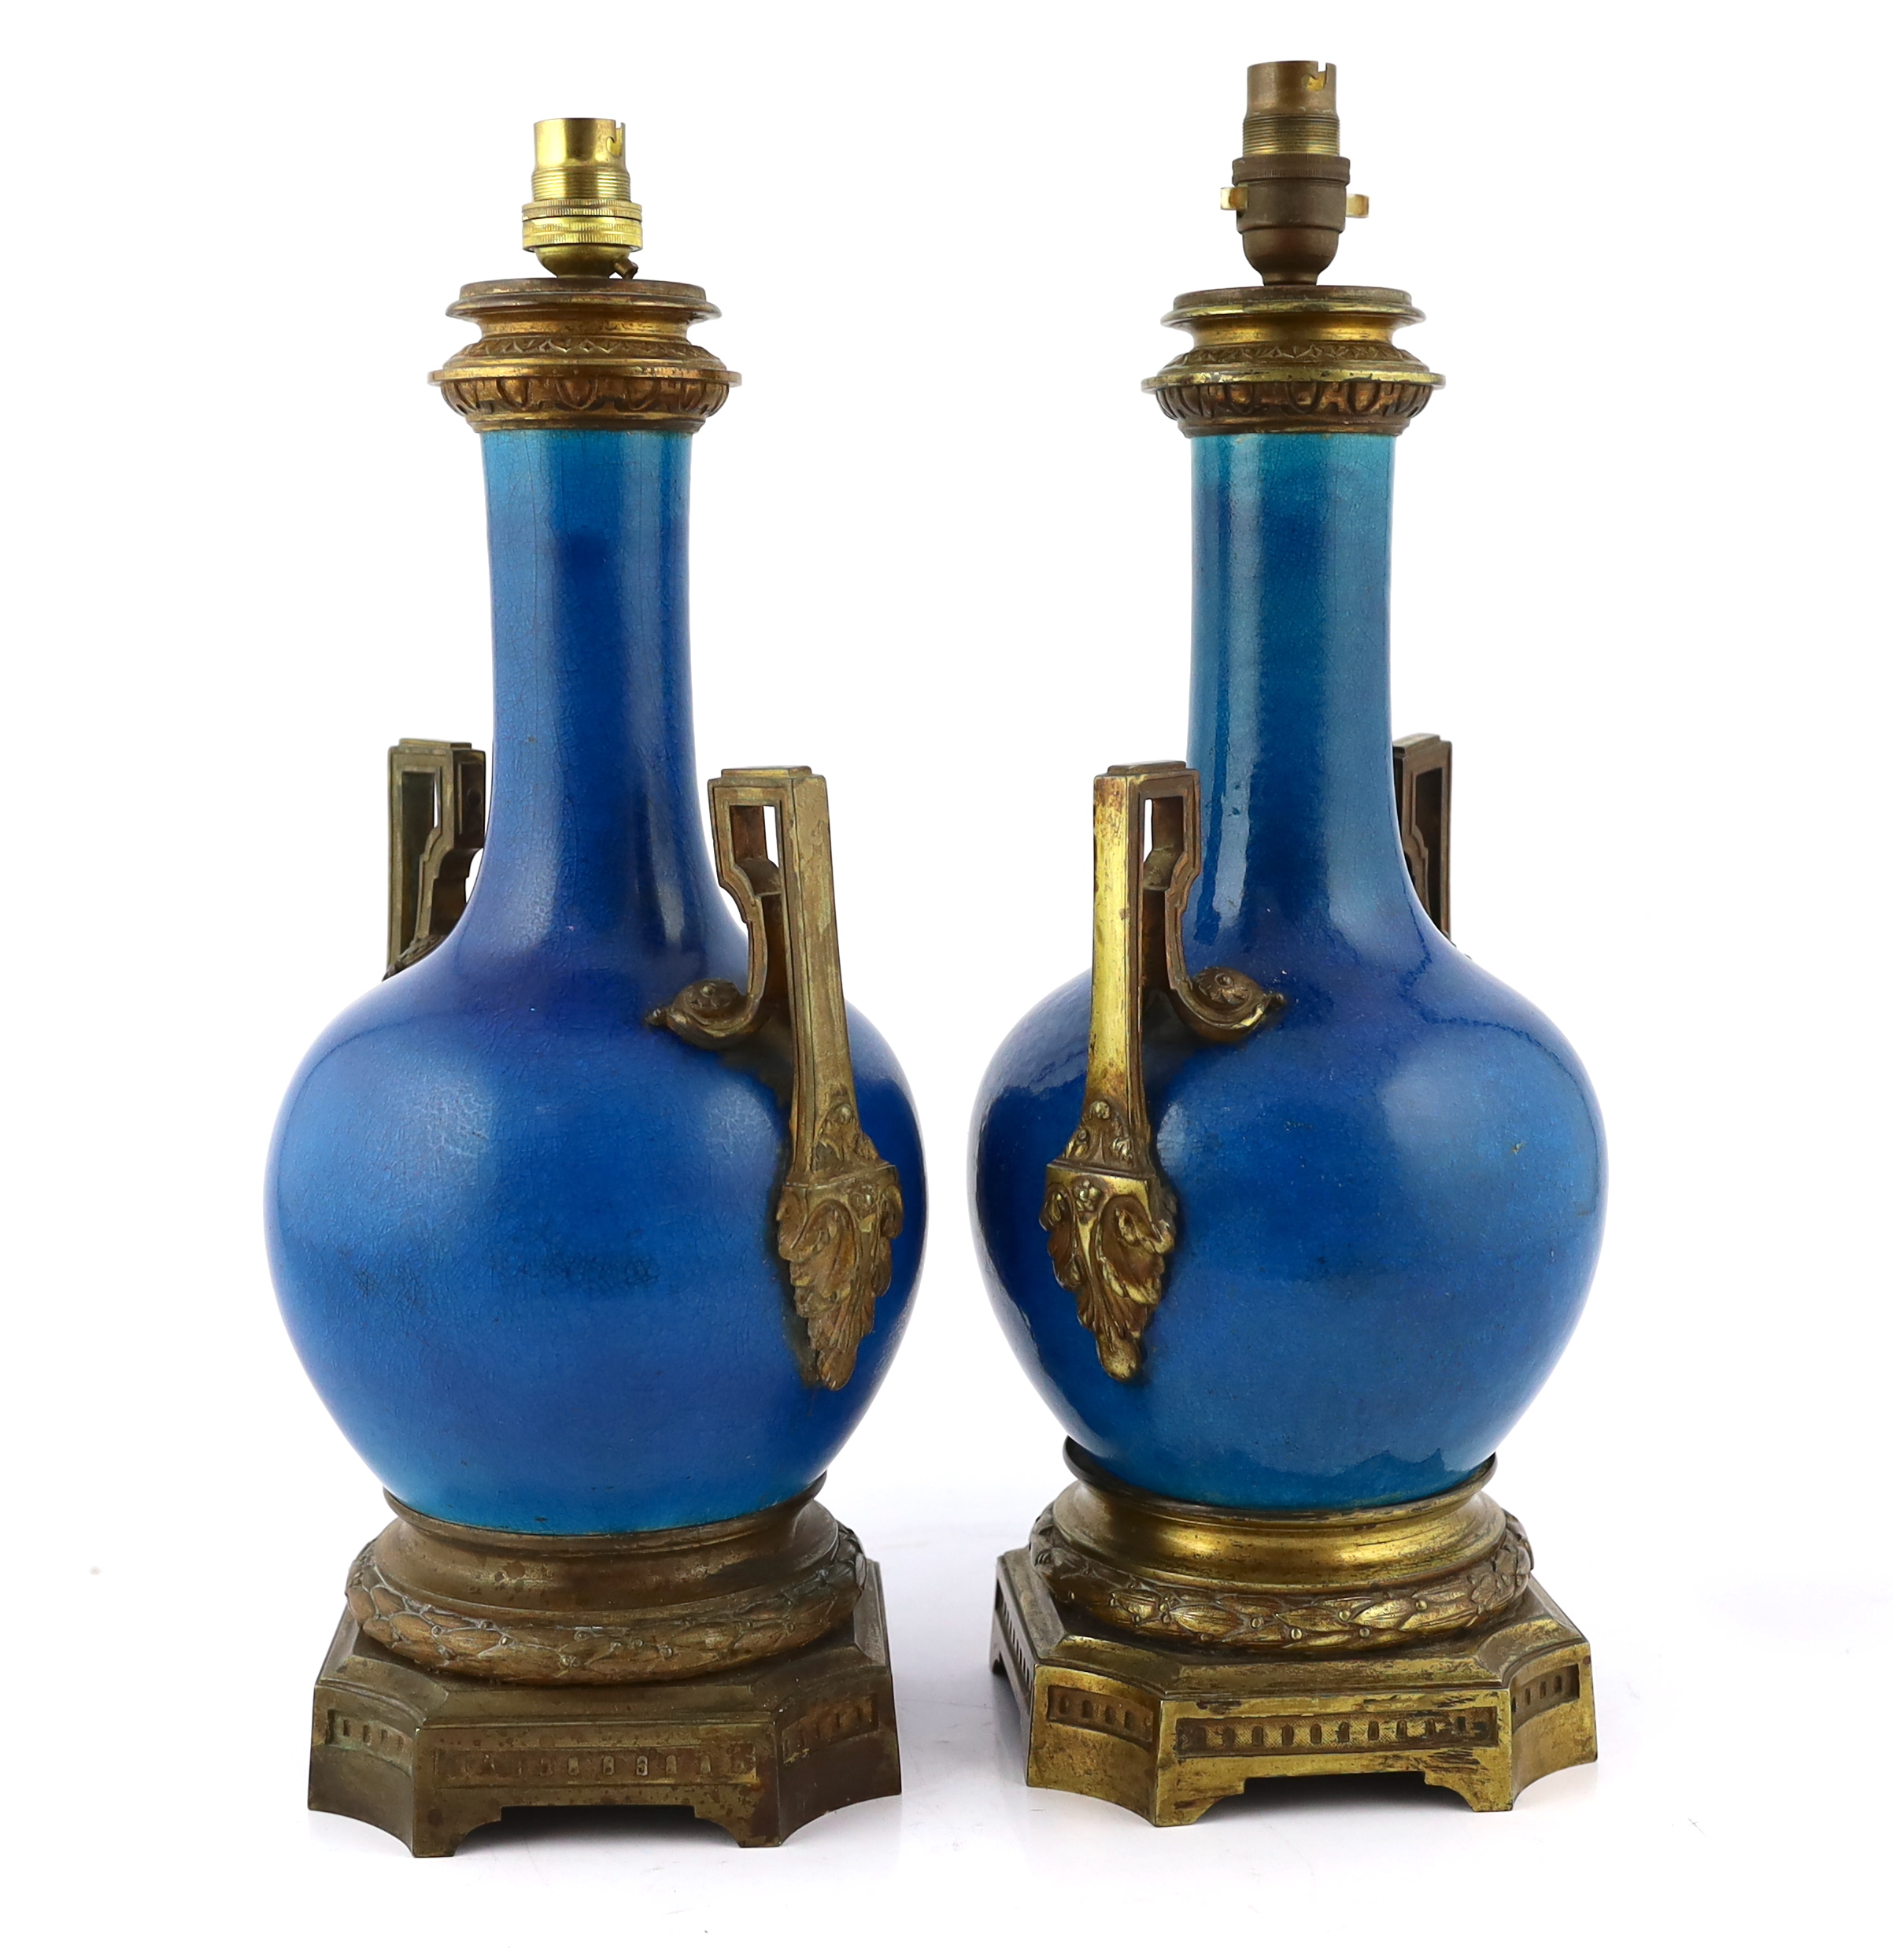 A pair of Chinese or Japanese turquoise-glazed bottle vases with Louis XVI style ormolu lamp mounts, late 19th century